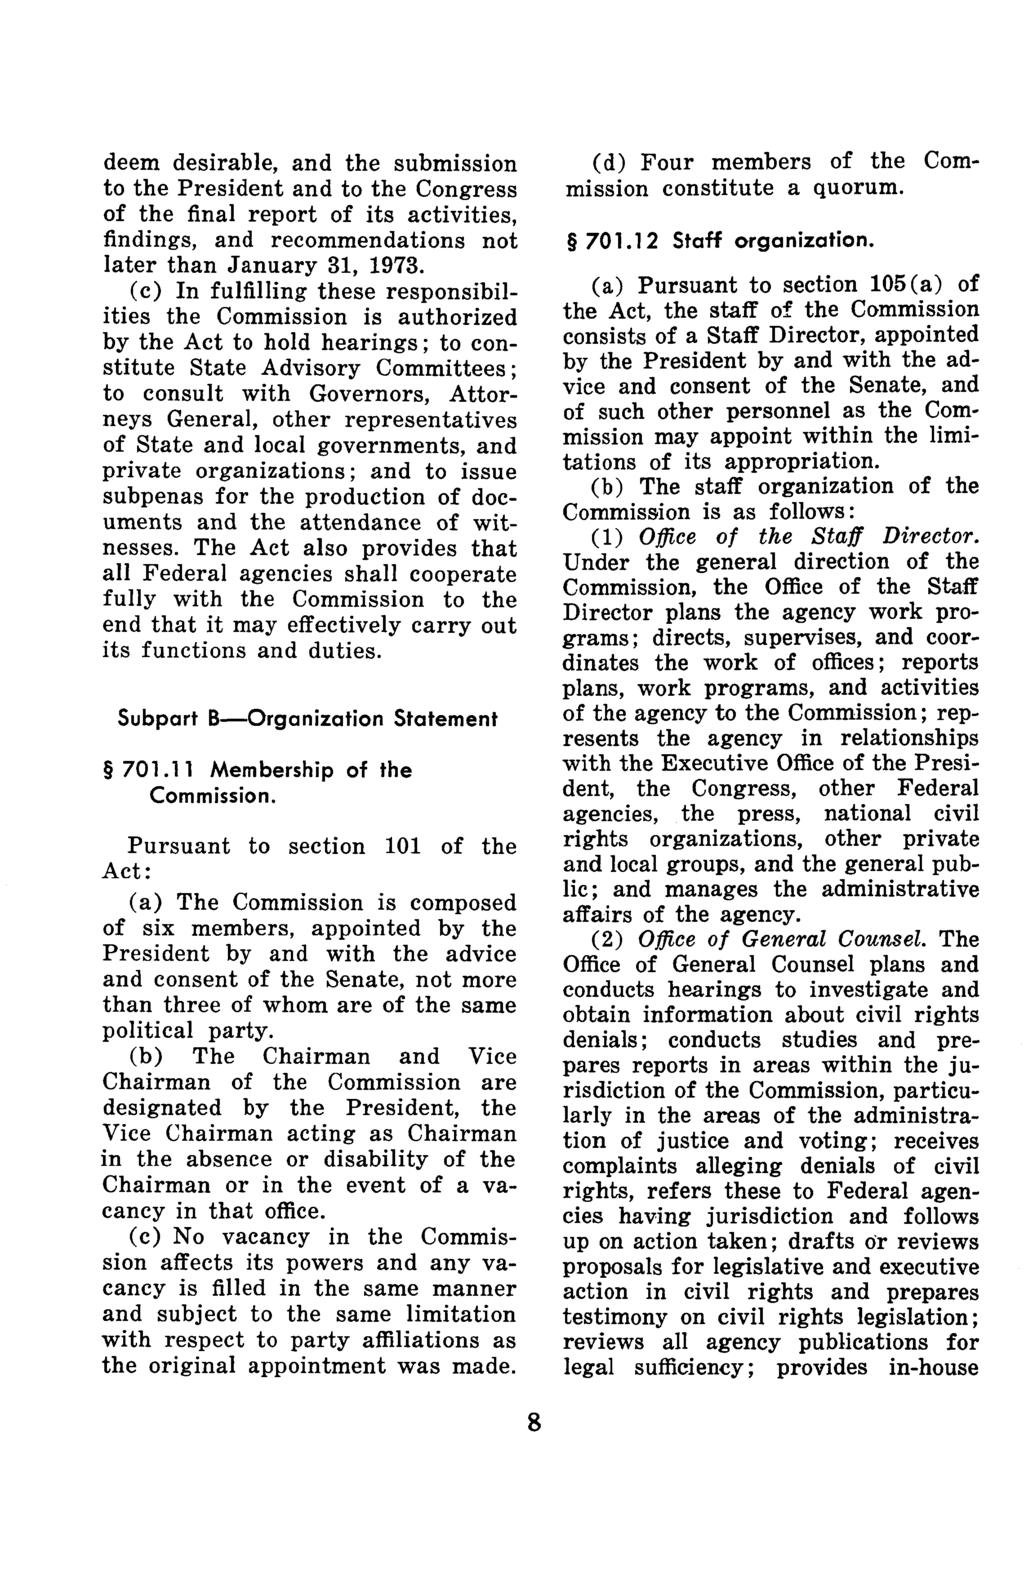 deem desirable, and the submission to the President and to the Congress of the final report of its activities, findings, and recommendations not later than January 31, 1973.